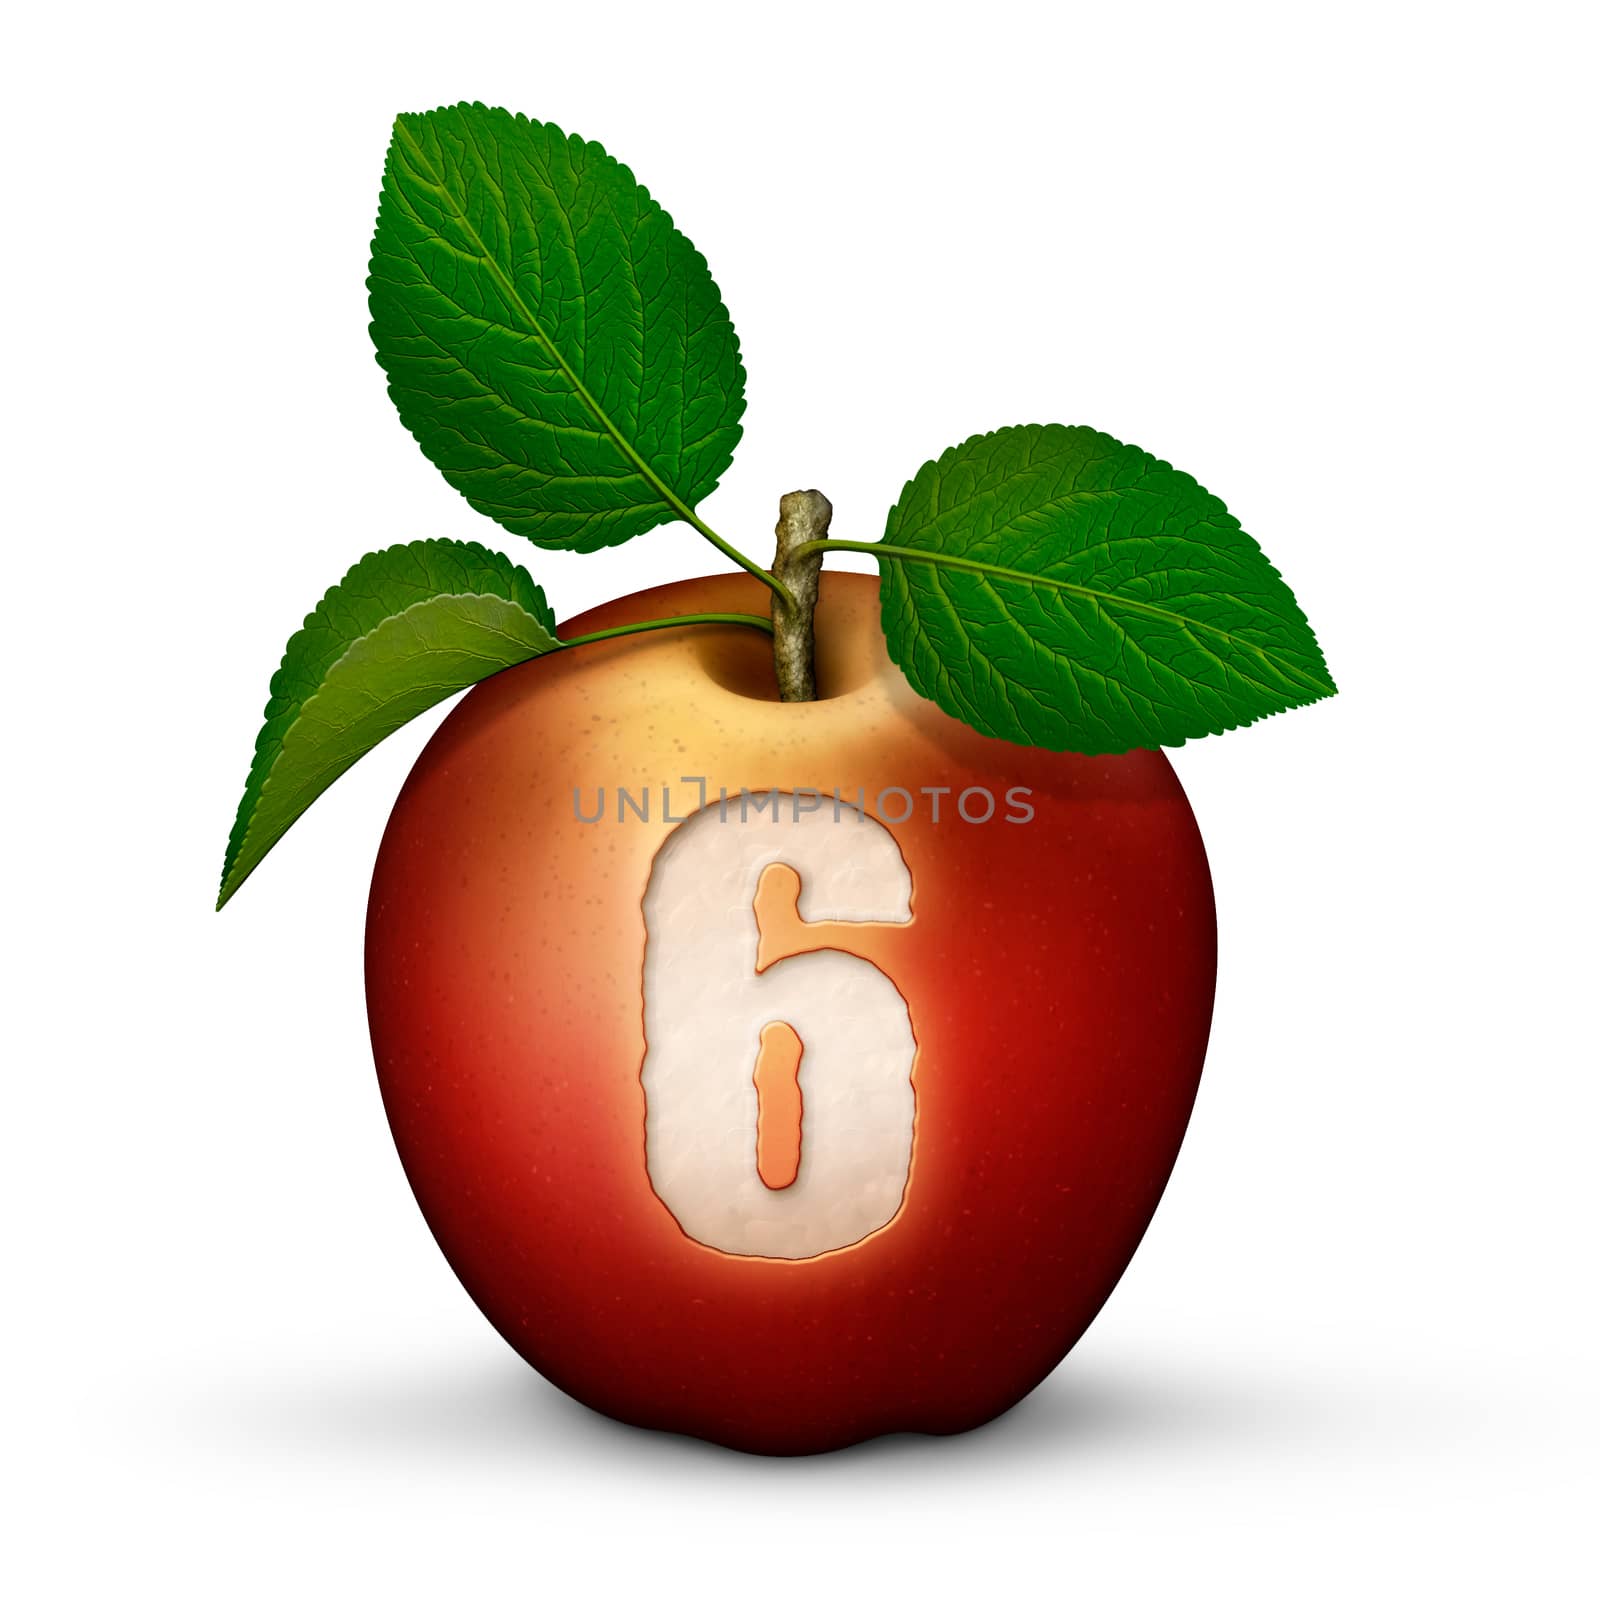 3D illustration of an apple with the number 6 bitten out of it.